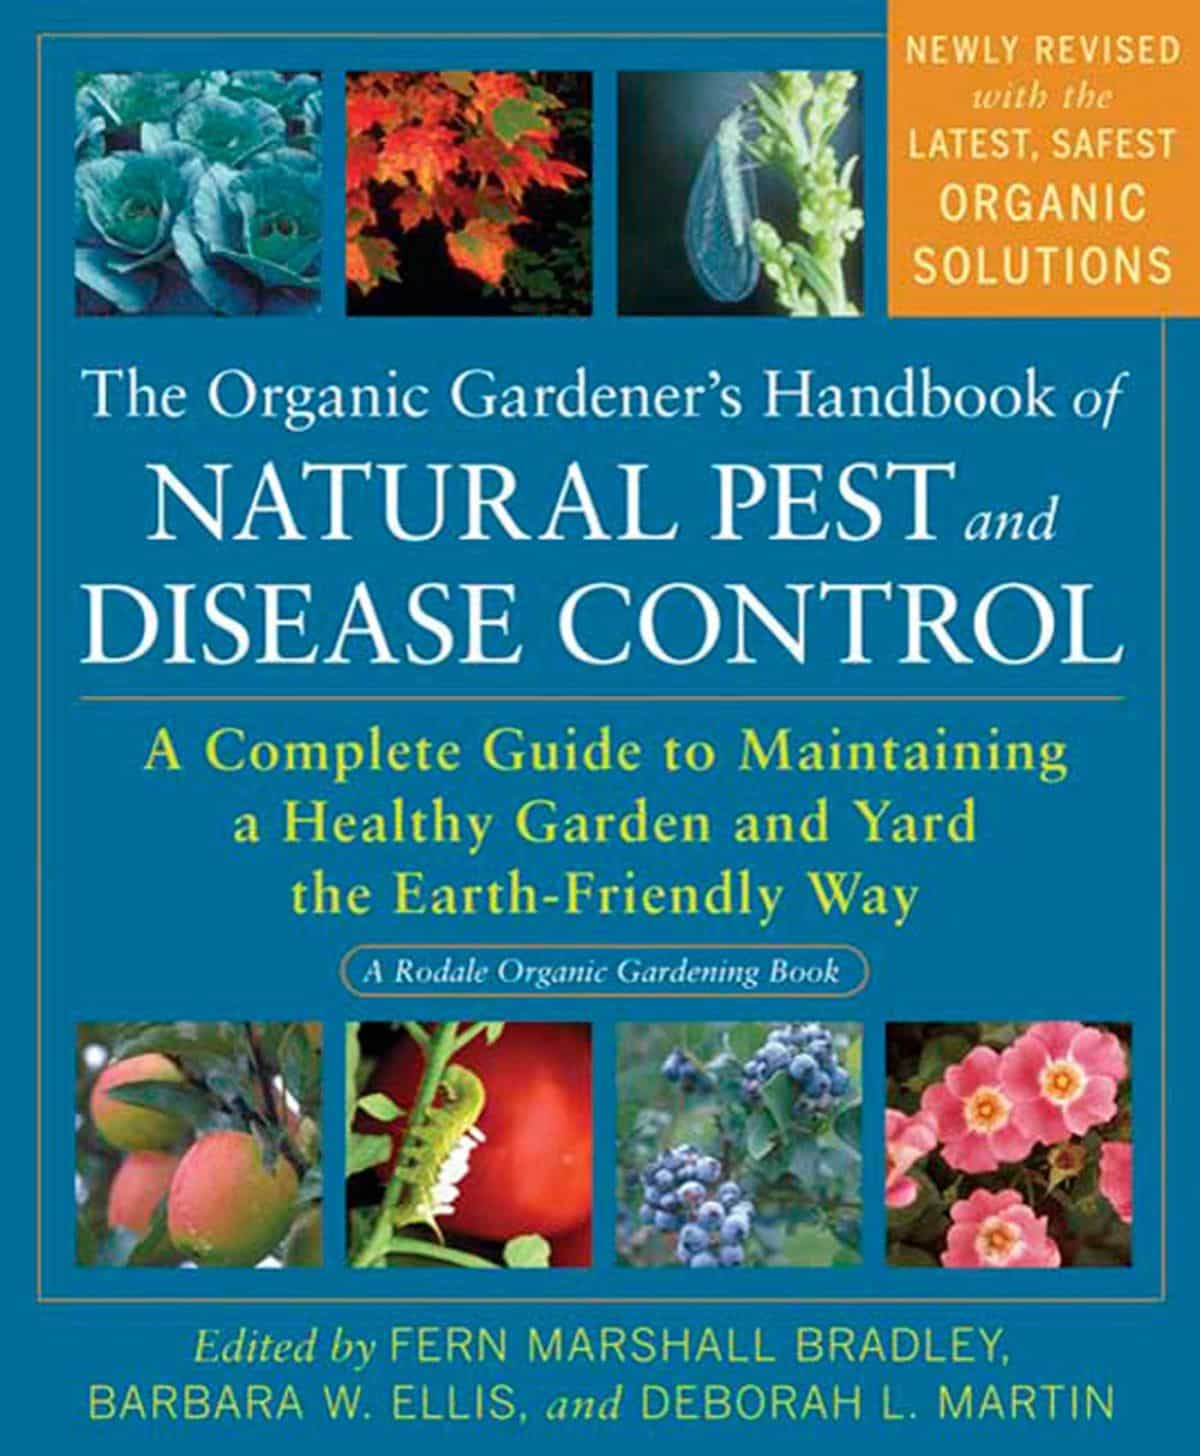 Picture of the book cover of The Organic Gardener's Handbook